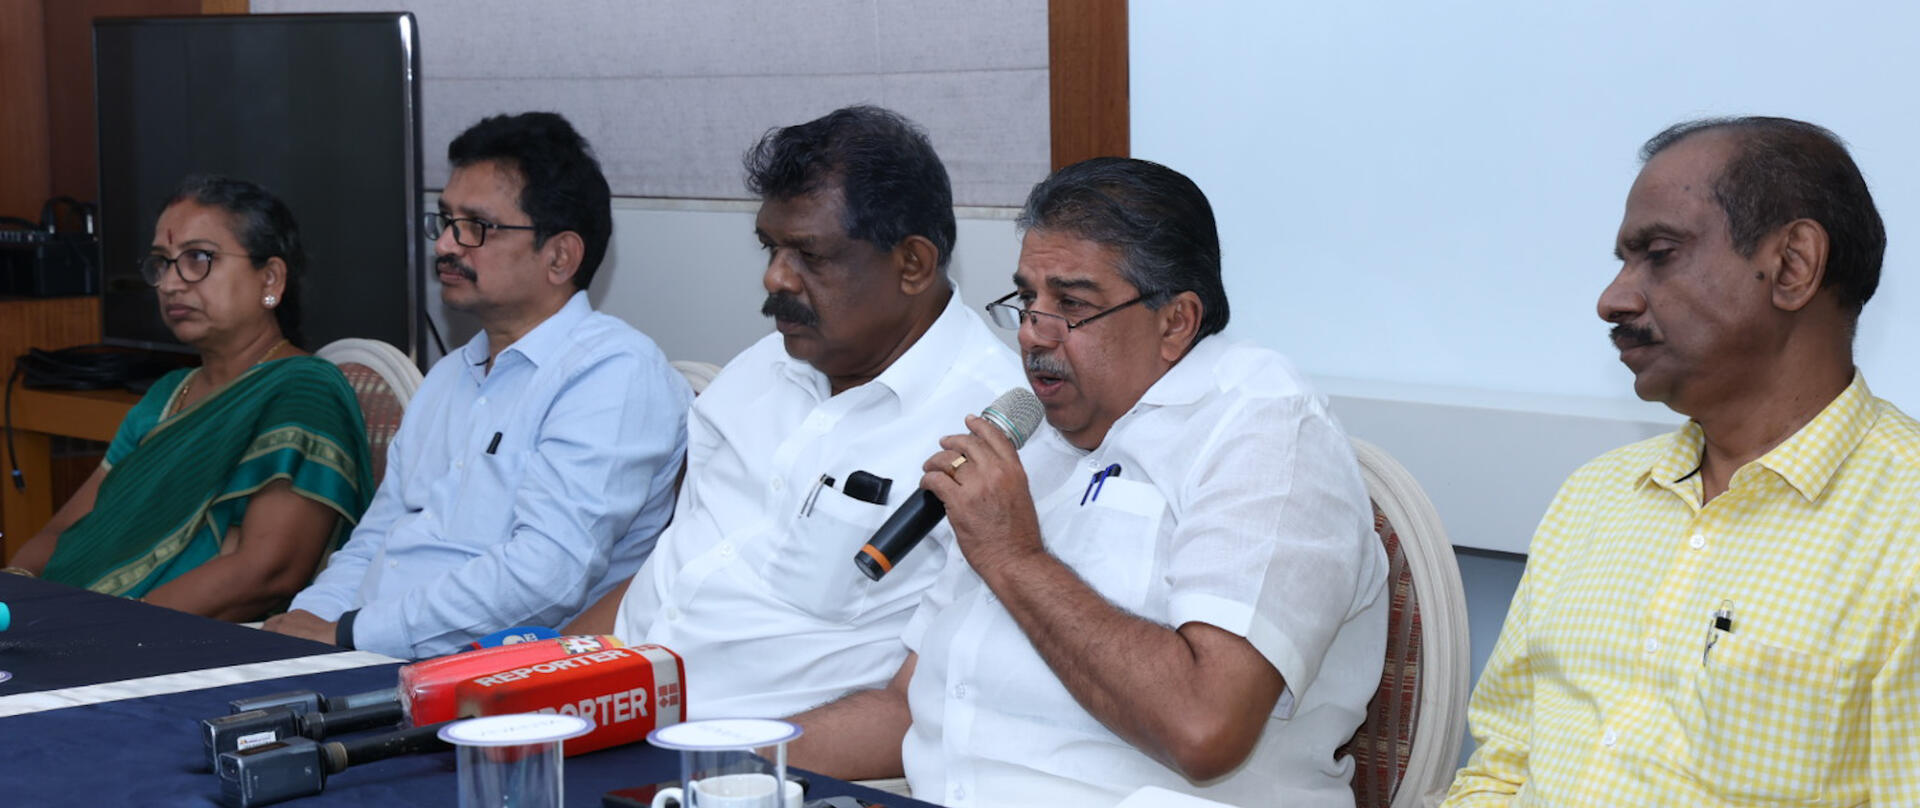 Offshore Geotube breakwater project first phase a success; remaining work to be expedited: Minister Saji Cherian